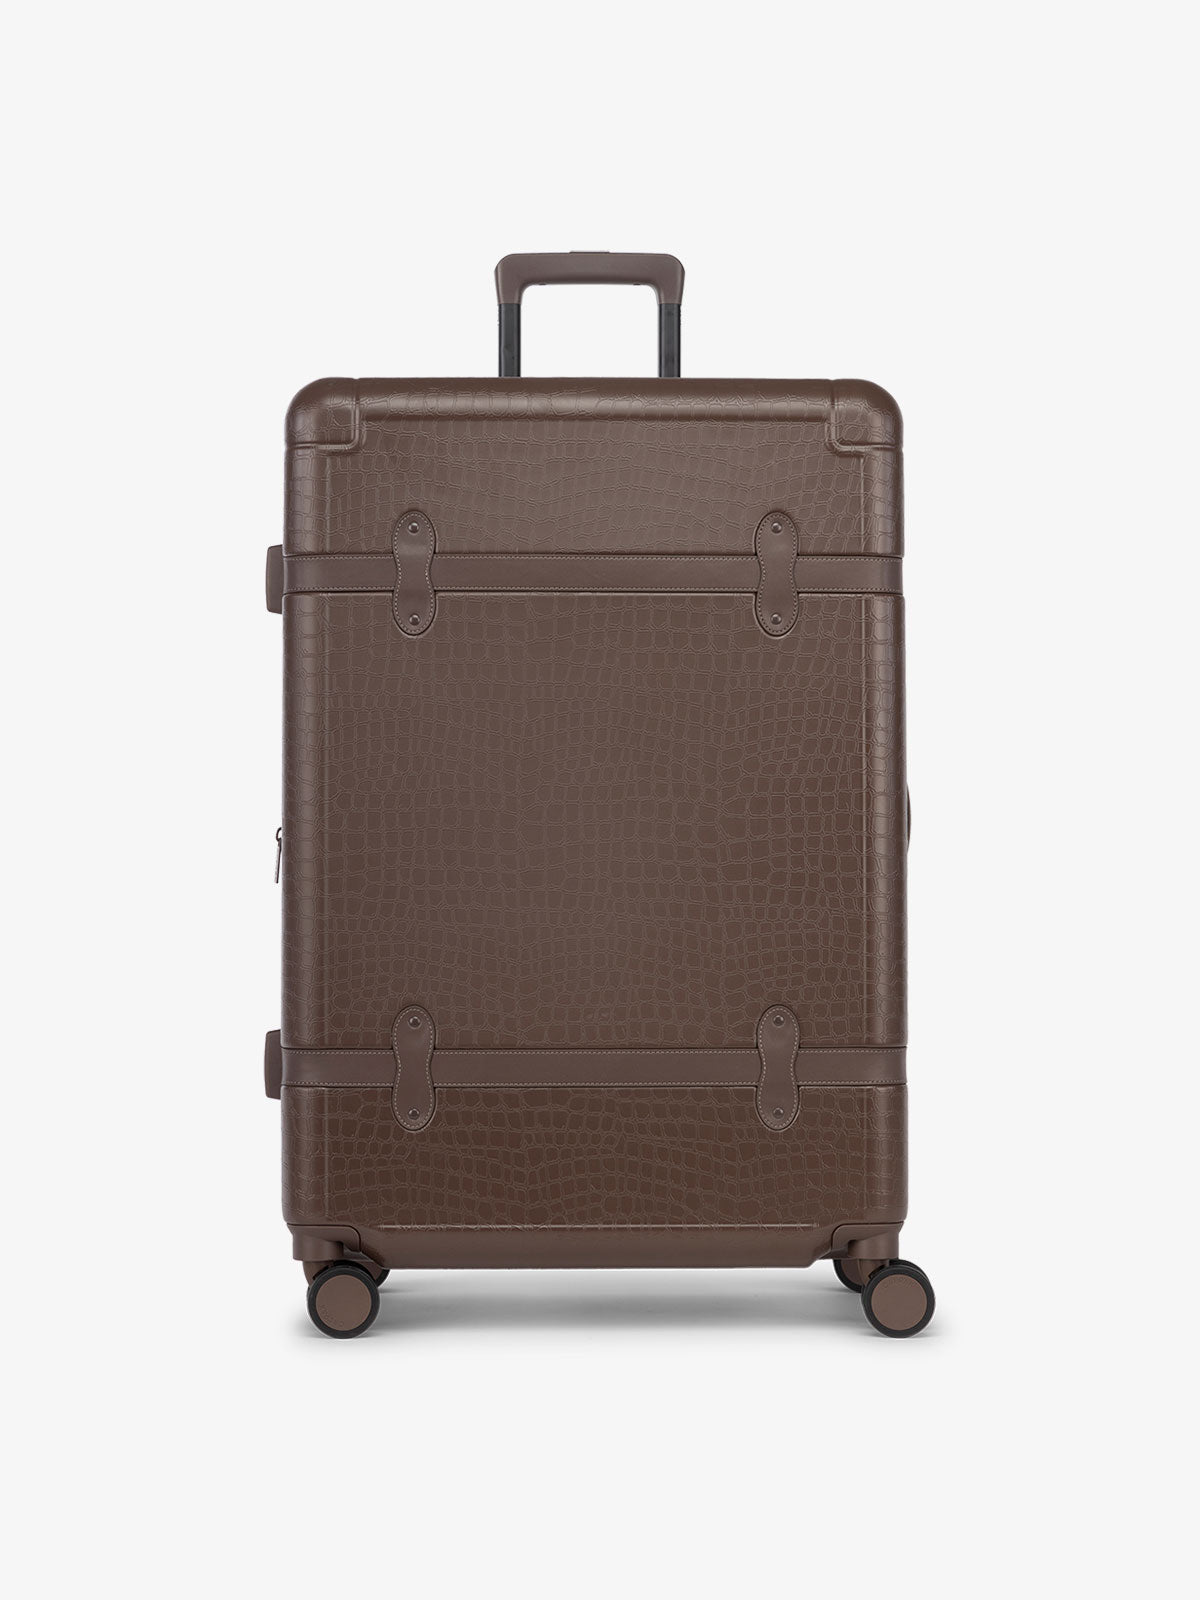 CALPAK TRNK large suitcase with hard shell exterior and four 360 spinner wheels in espresso vintage trunk style